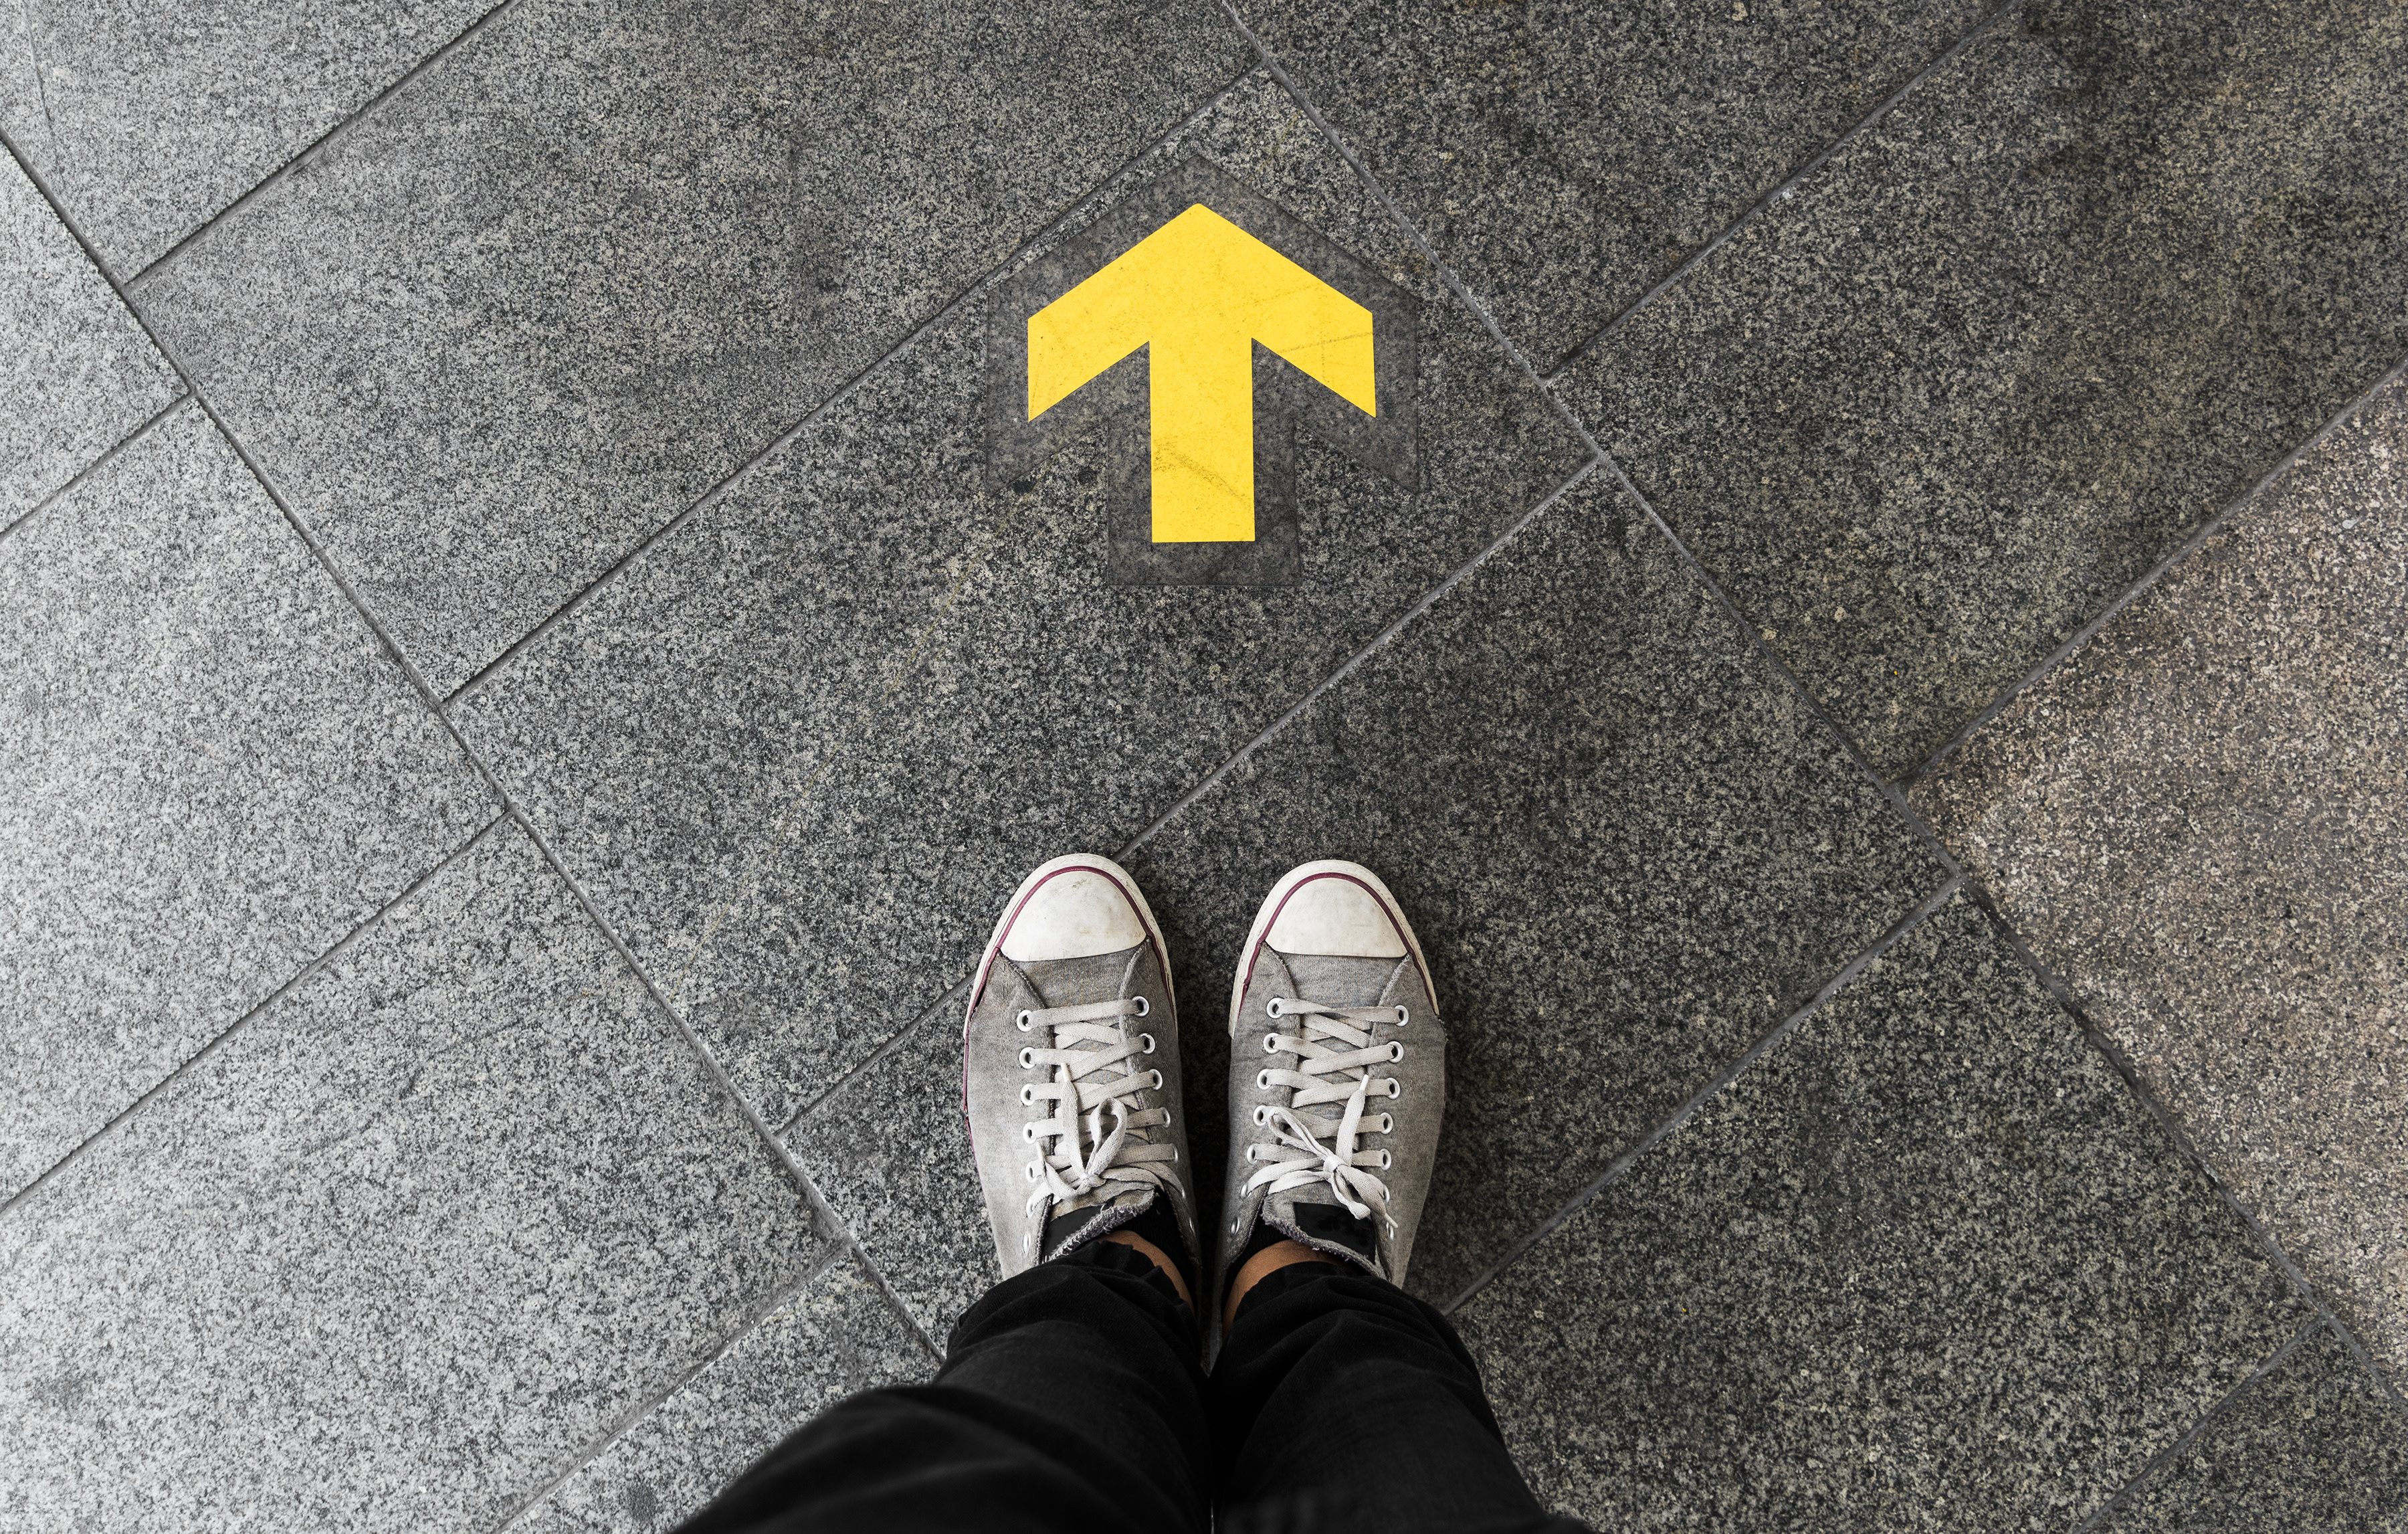 Image looking down at shoes (feet) with a yellow arrow pointing forwards and away